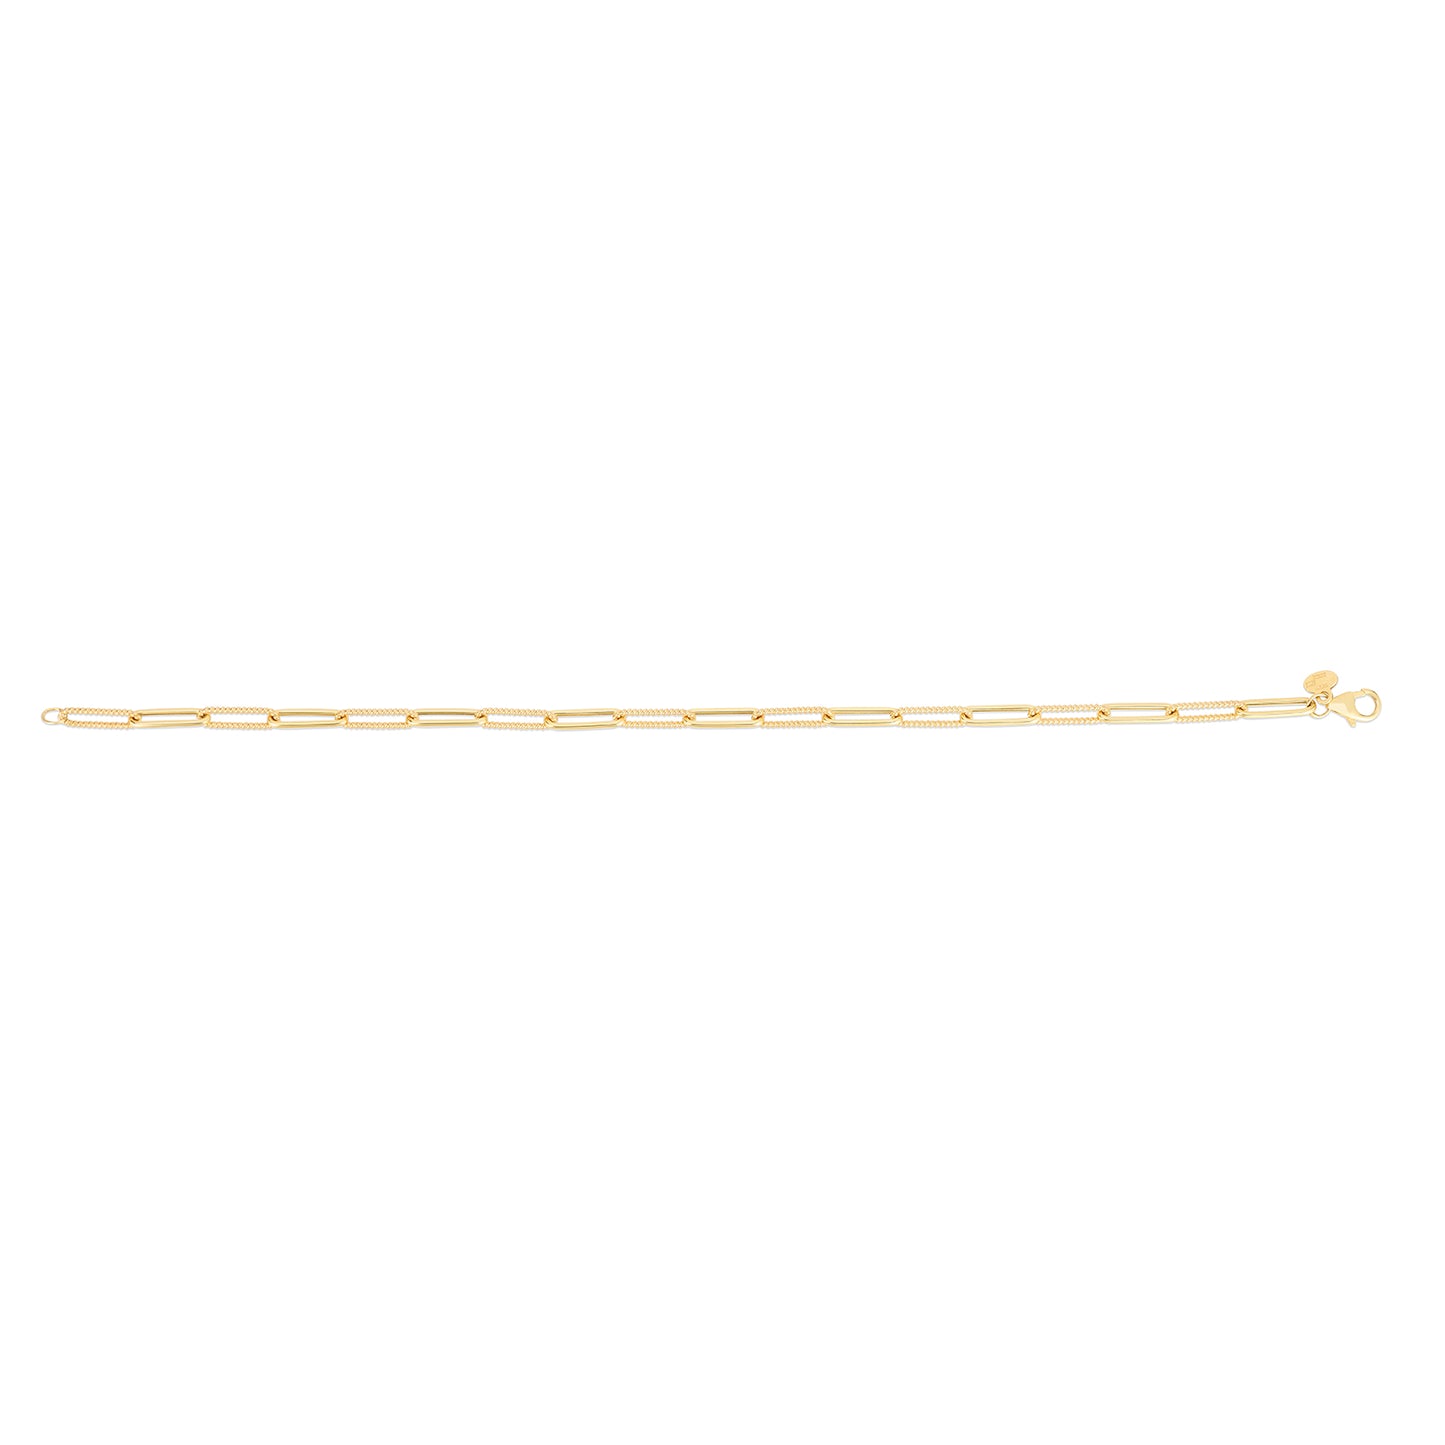 14K Yellow Gold Textured Paperclip Bracelet with Pear Shaped Lobster Clasp